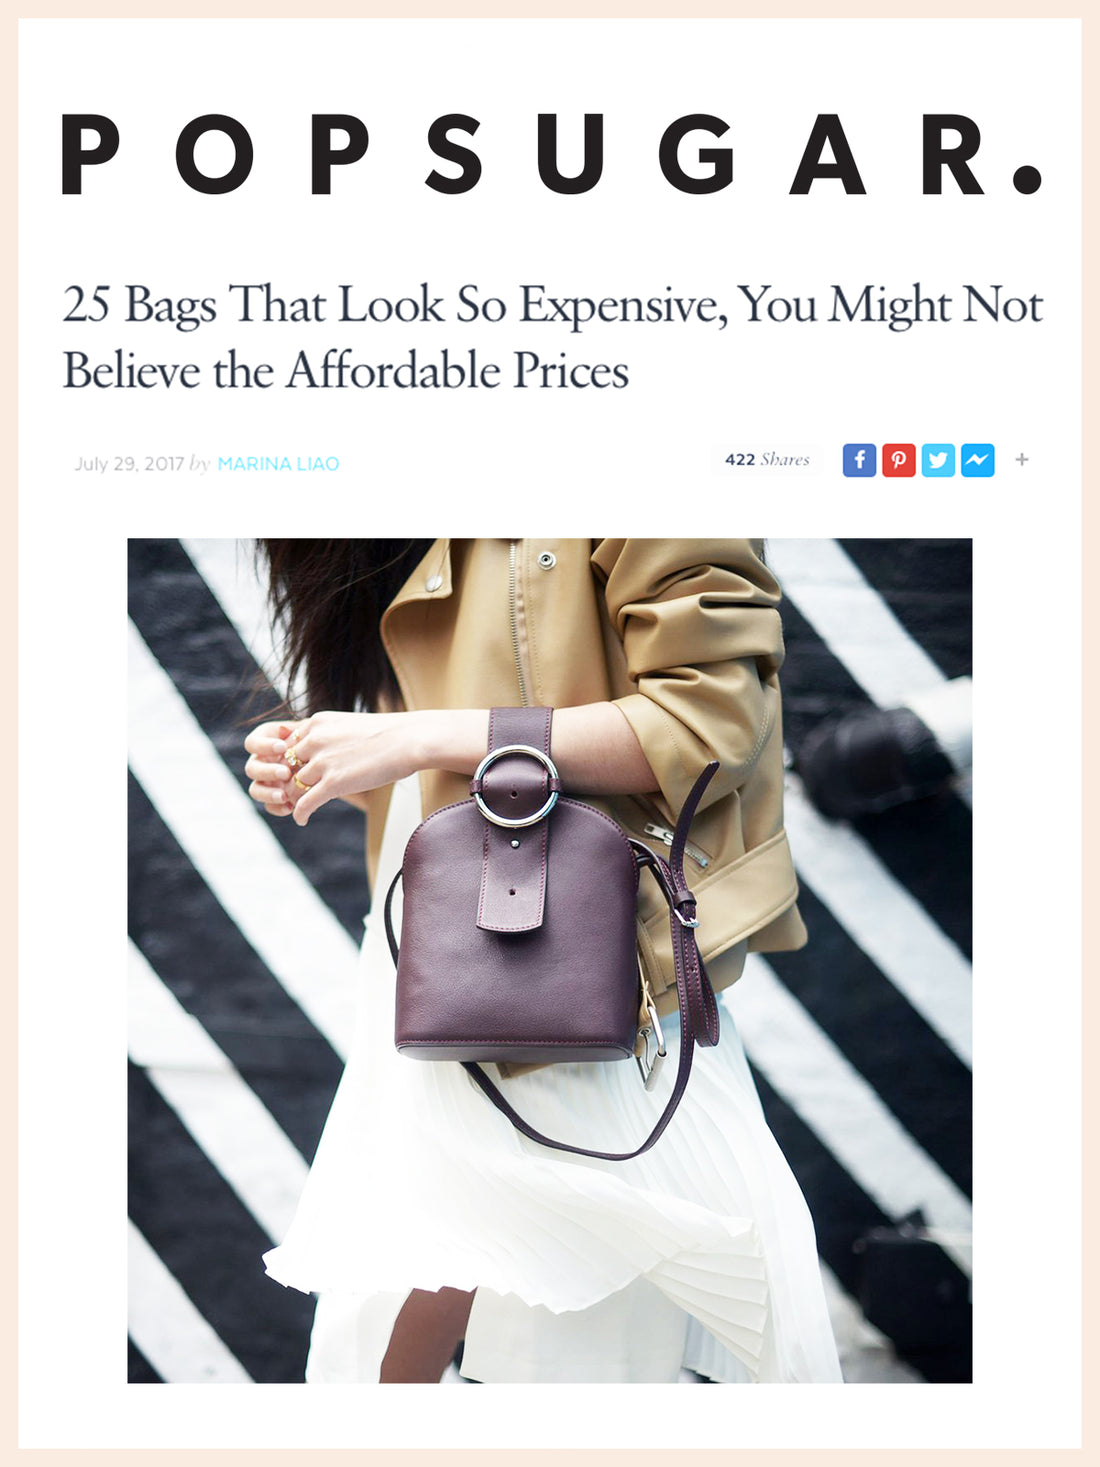 POP SUGAR FASHION, 25 Bags That Look So Expensive With Affordable Prices